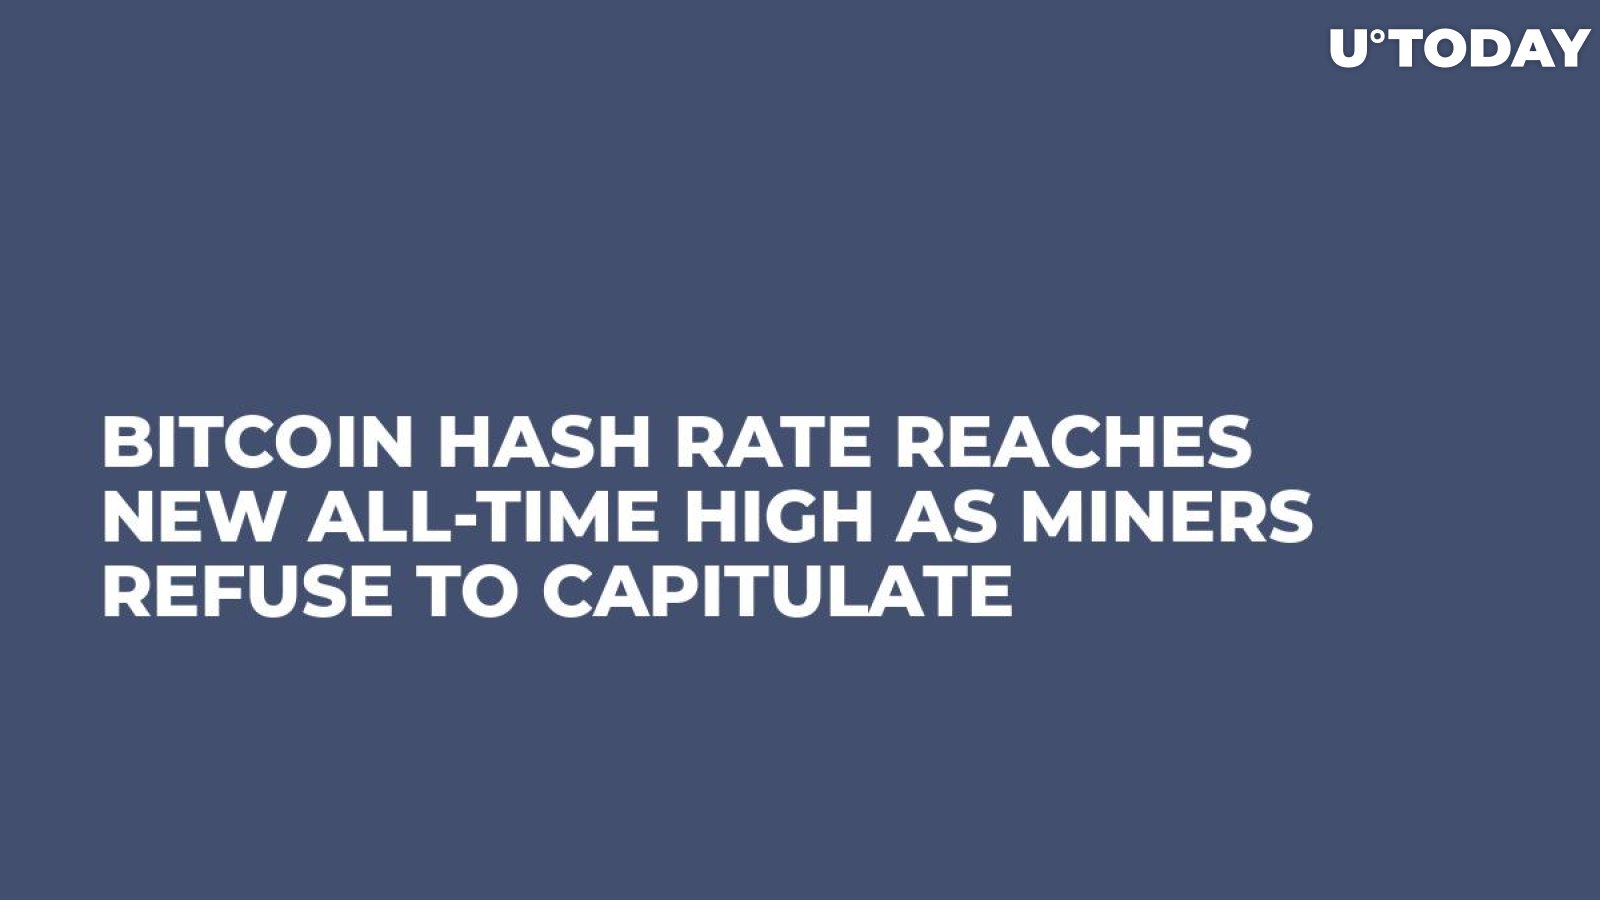 Bitcoin Hash Rate Reaches New All-Time High as Miners Refuse to Capitulate